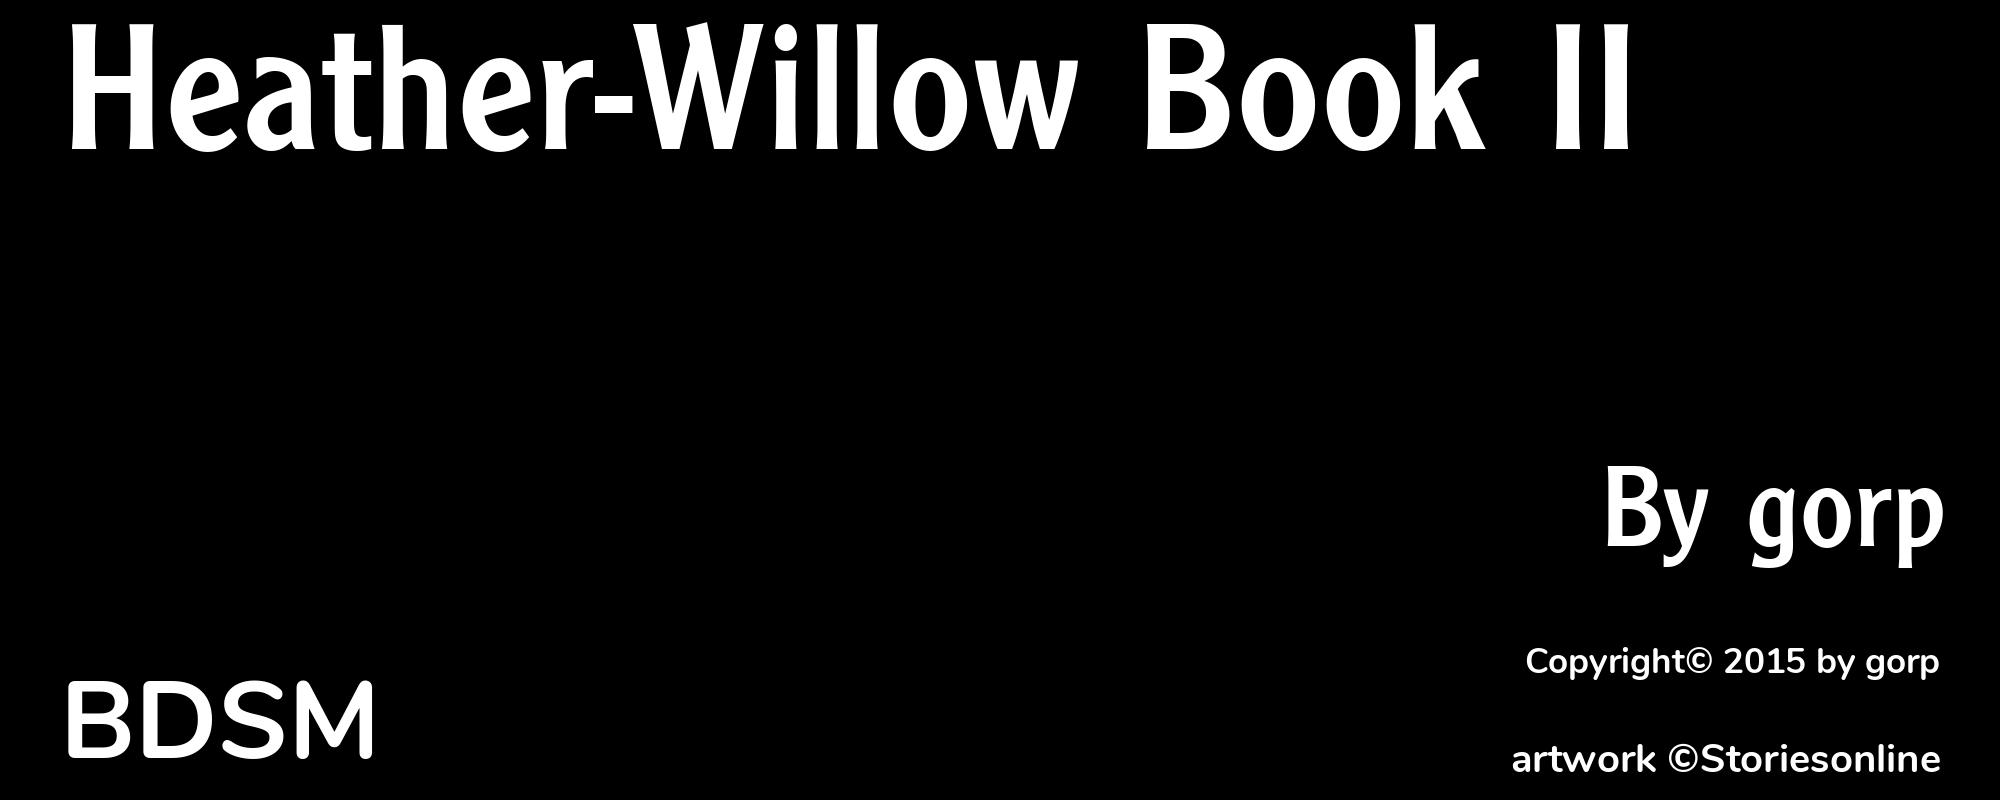 Heather-Willow Book II - Cover